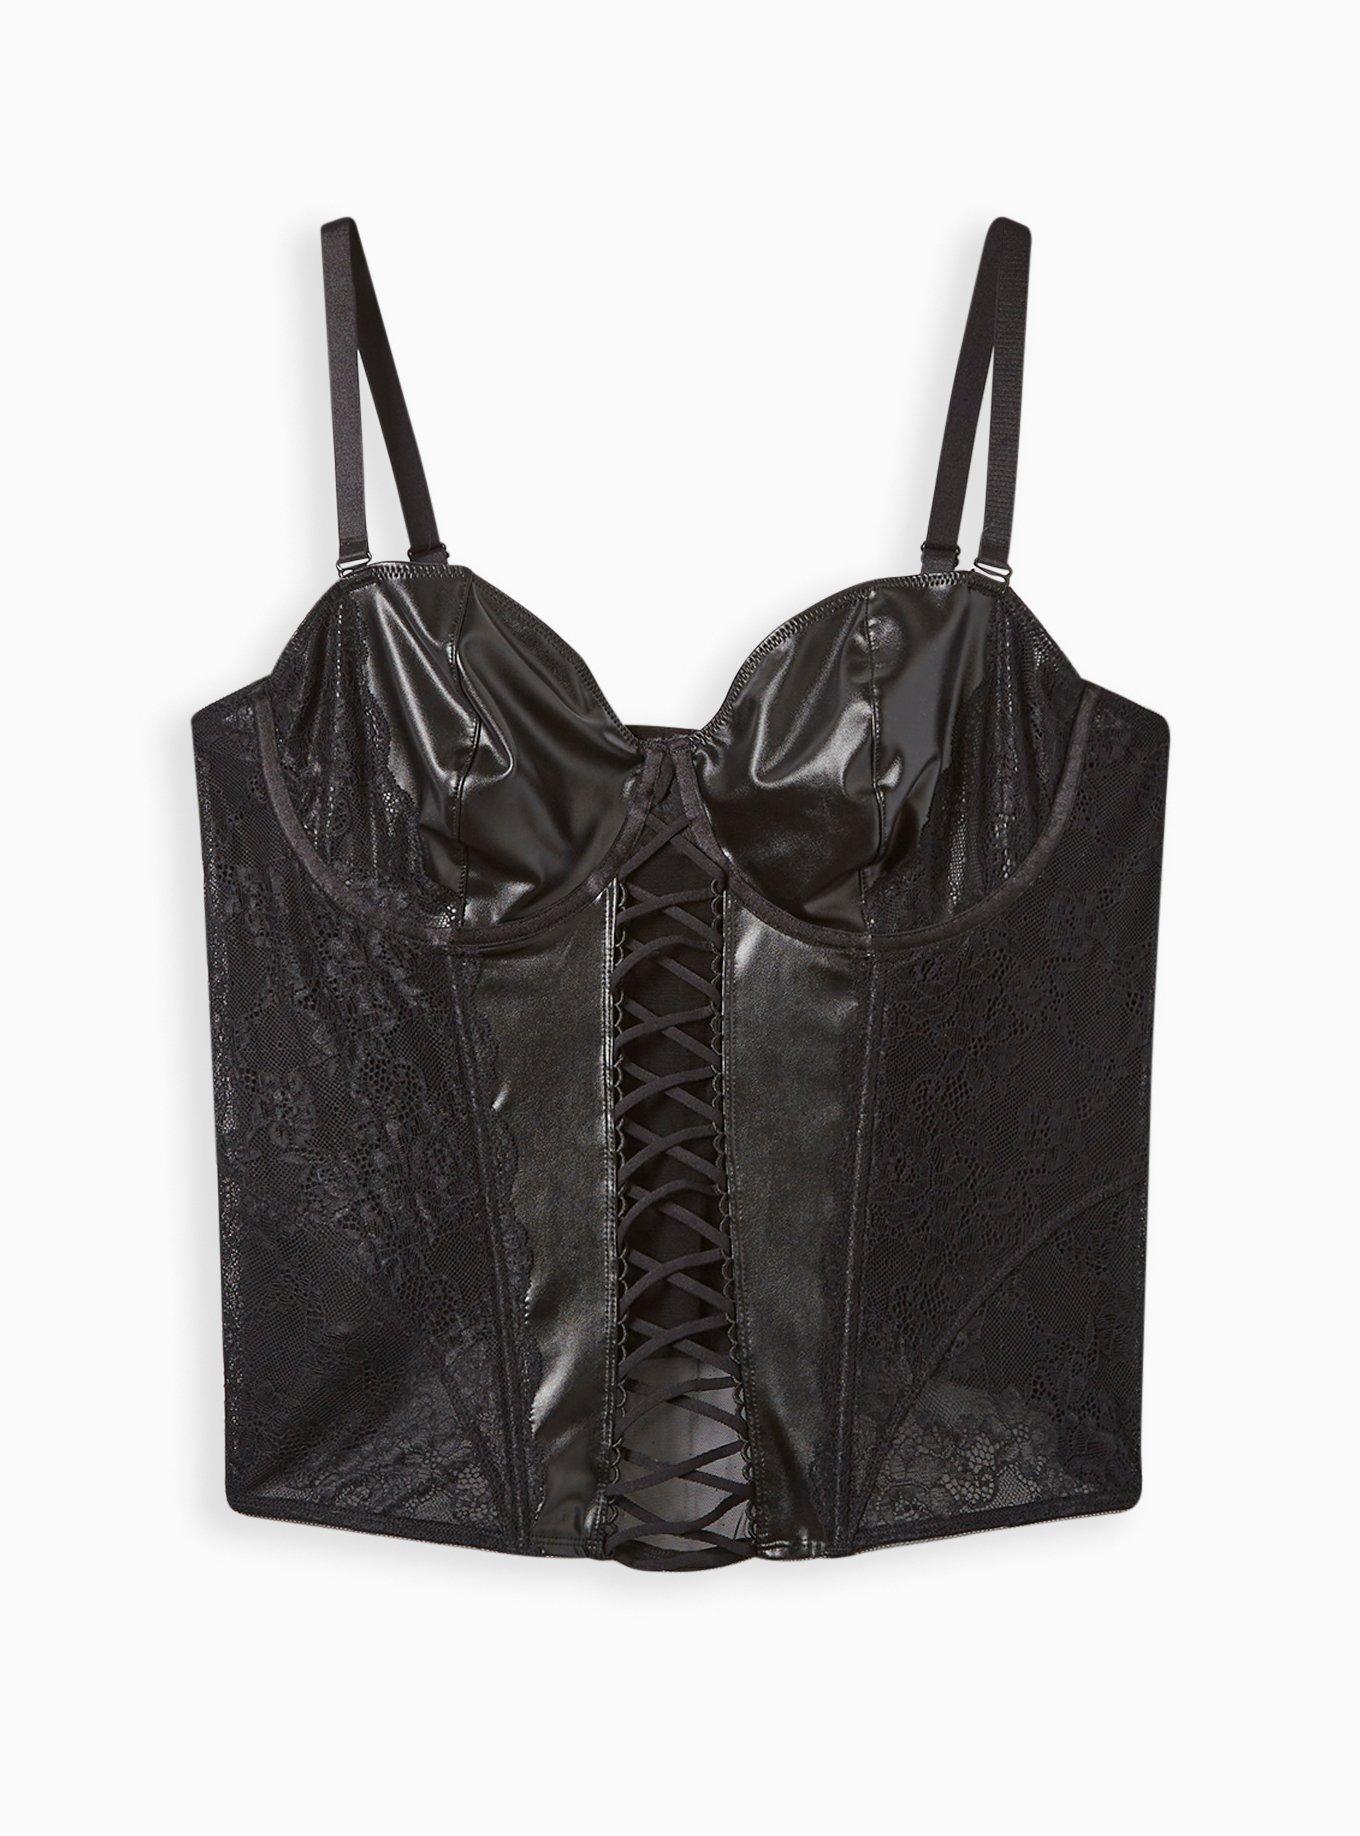 Plus Size - Pleather and Lace Bustier - Torrid